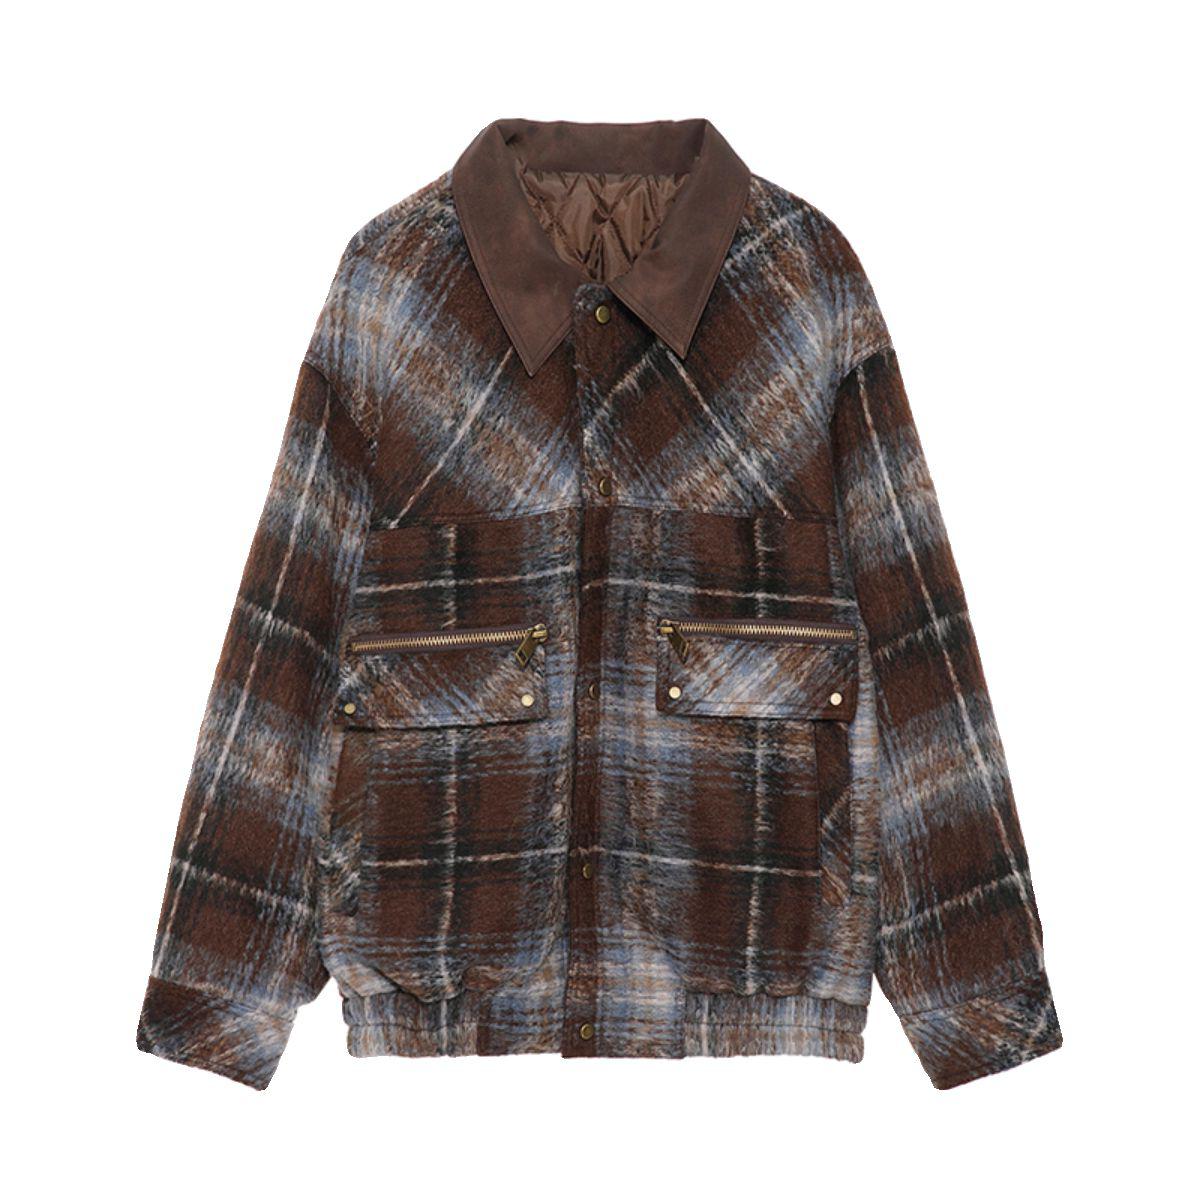 Plaid Collared Jacket Korean Street Fashion Jacket By Mr Nearly Shop Online at OH Vault